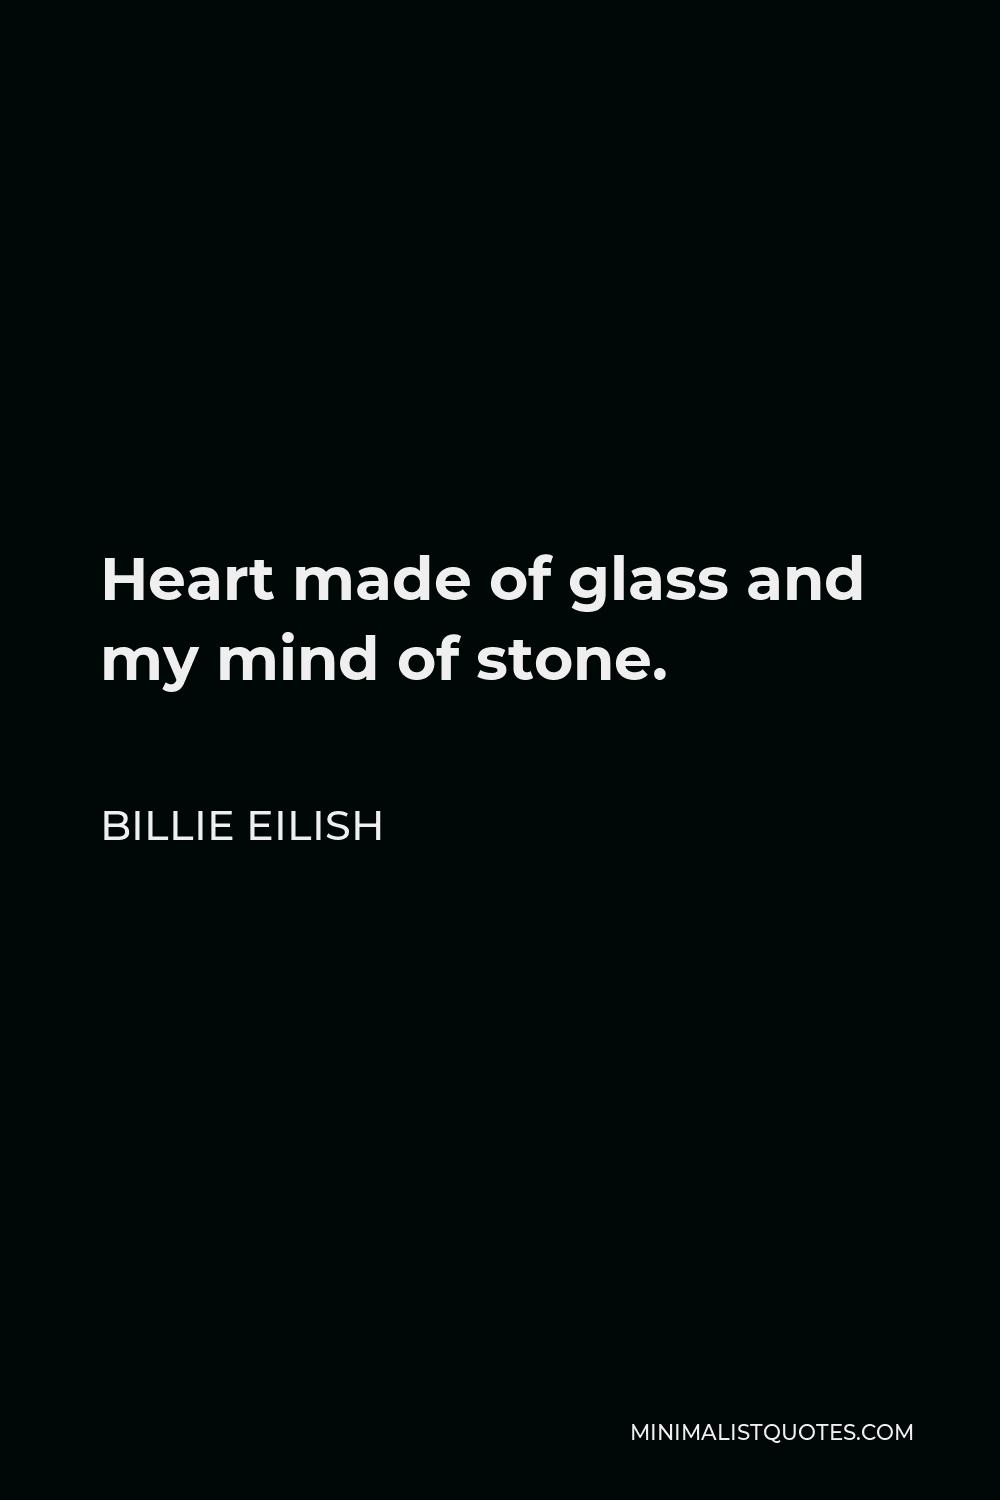 Billie Eilish Quote - Heart made of glass and my mind of stone.